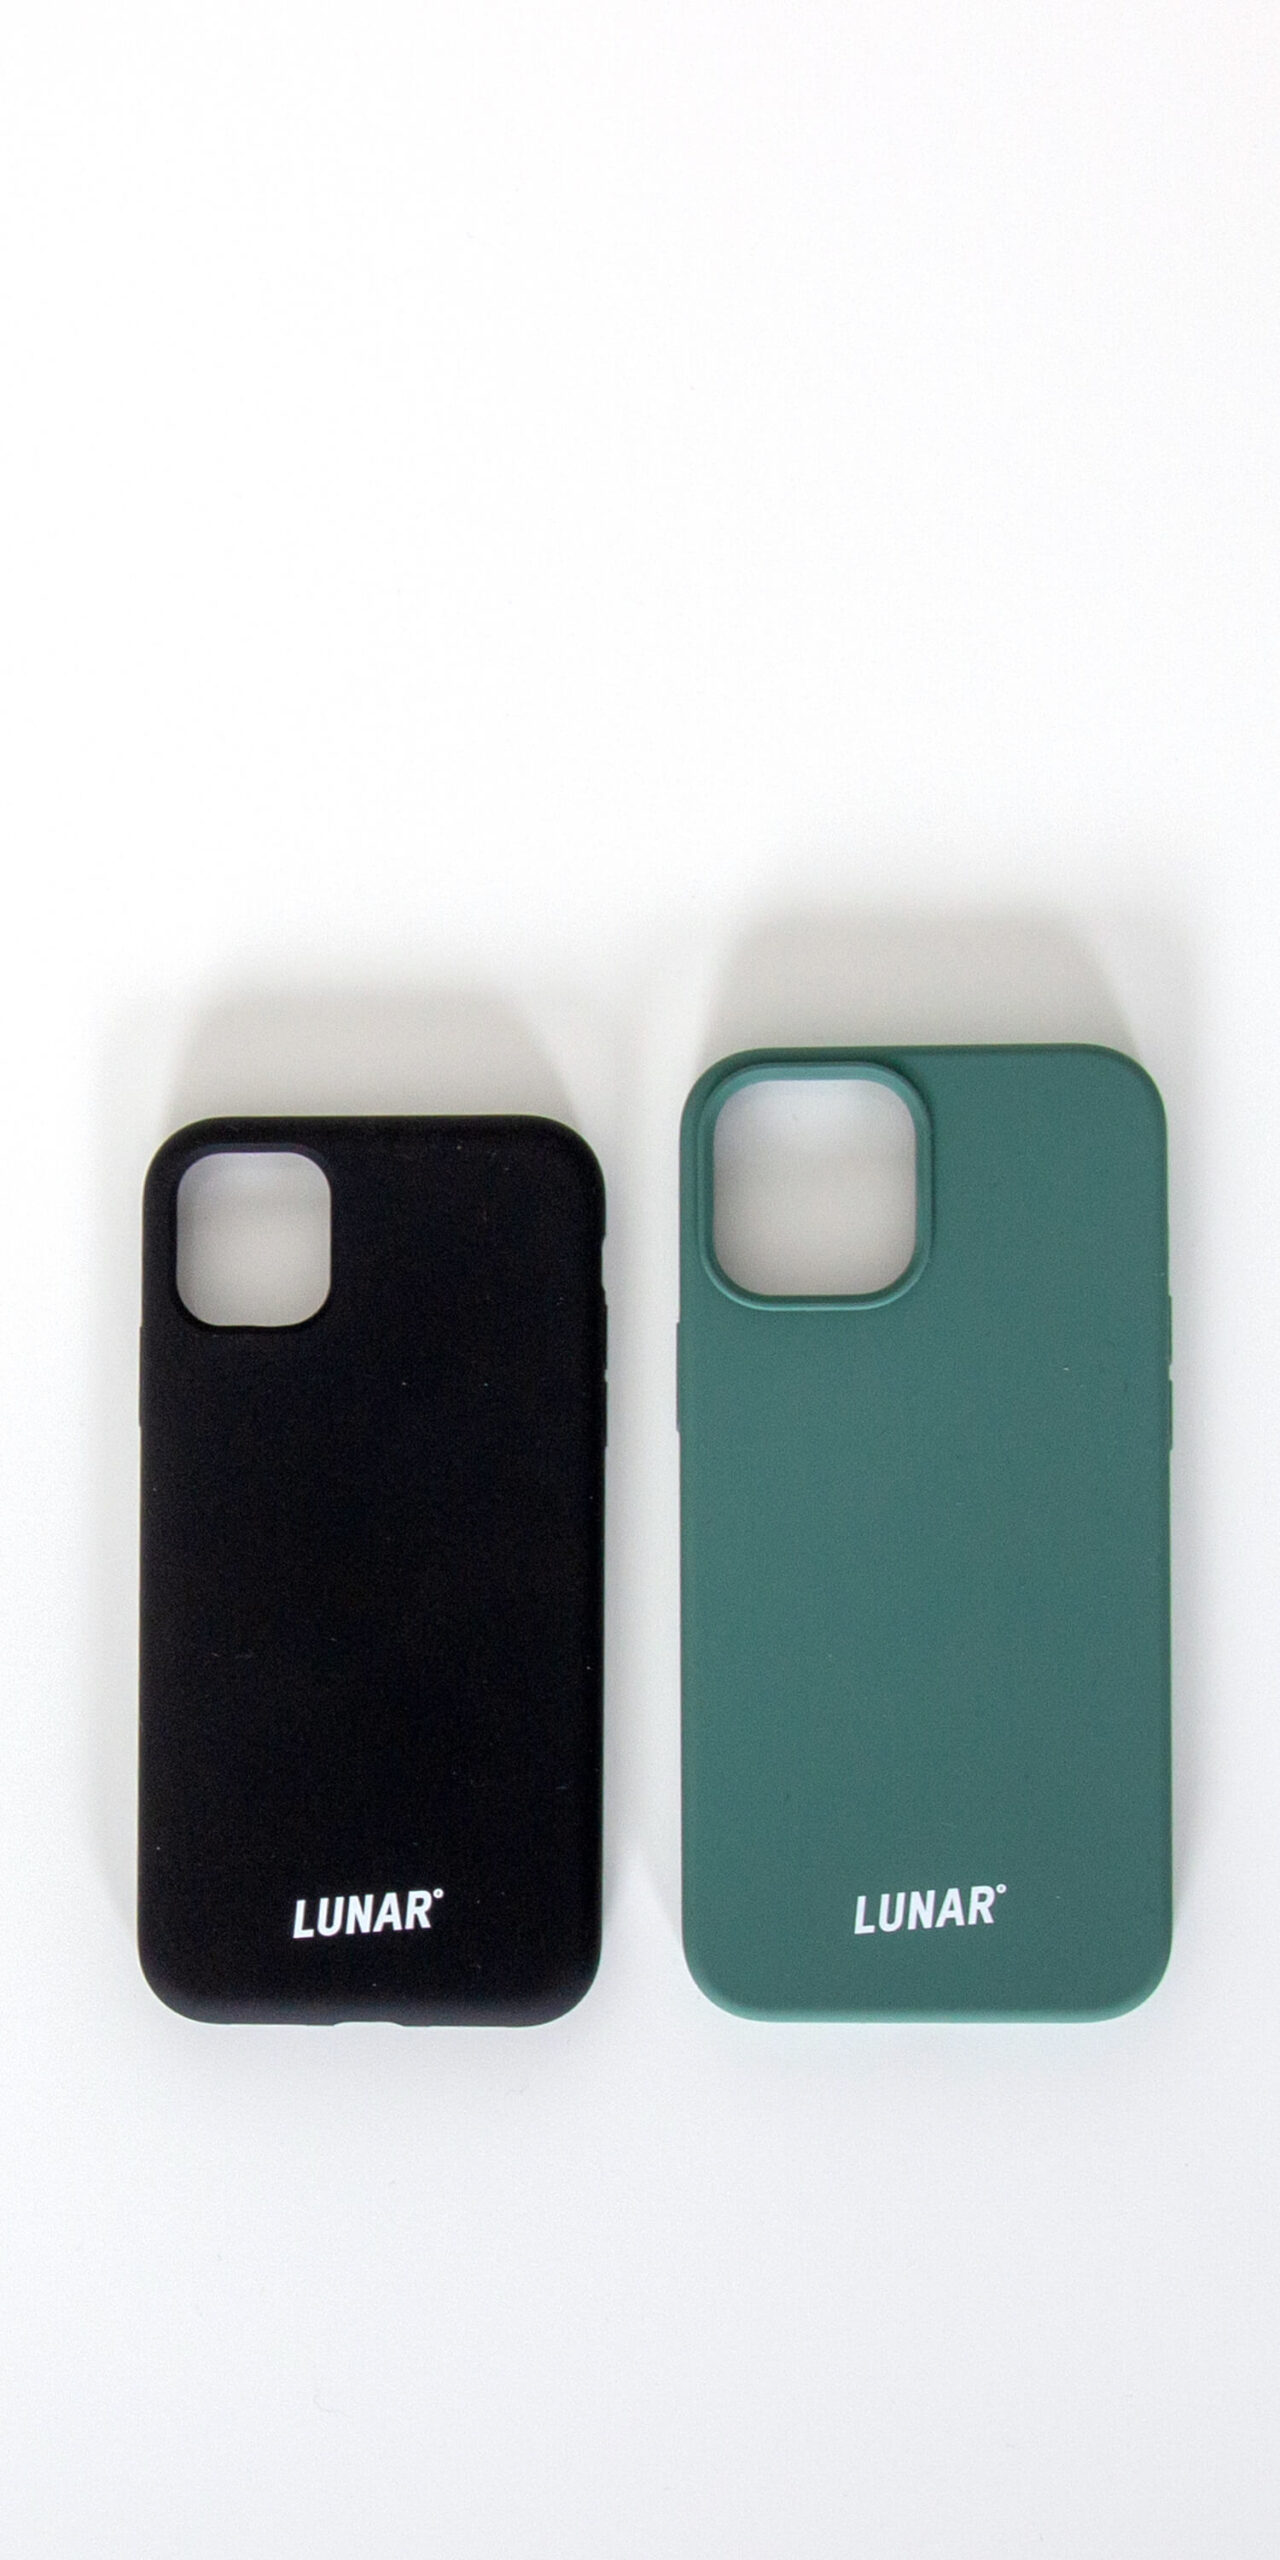 merchandise, logo cover, Iphone cover